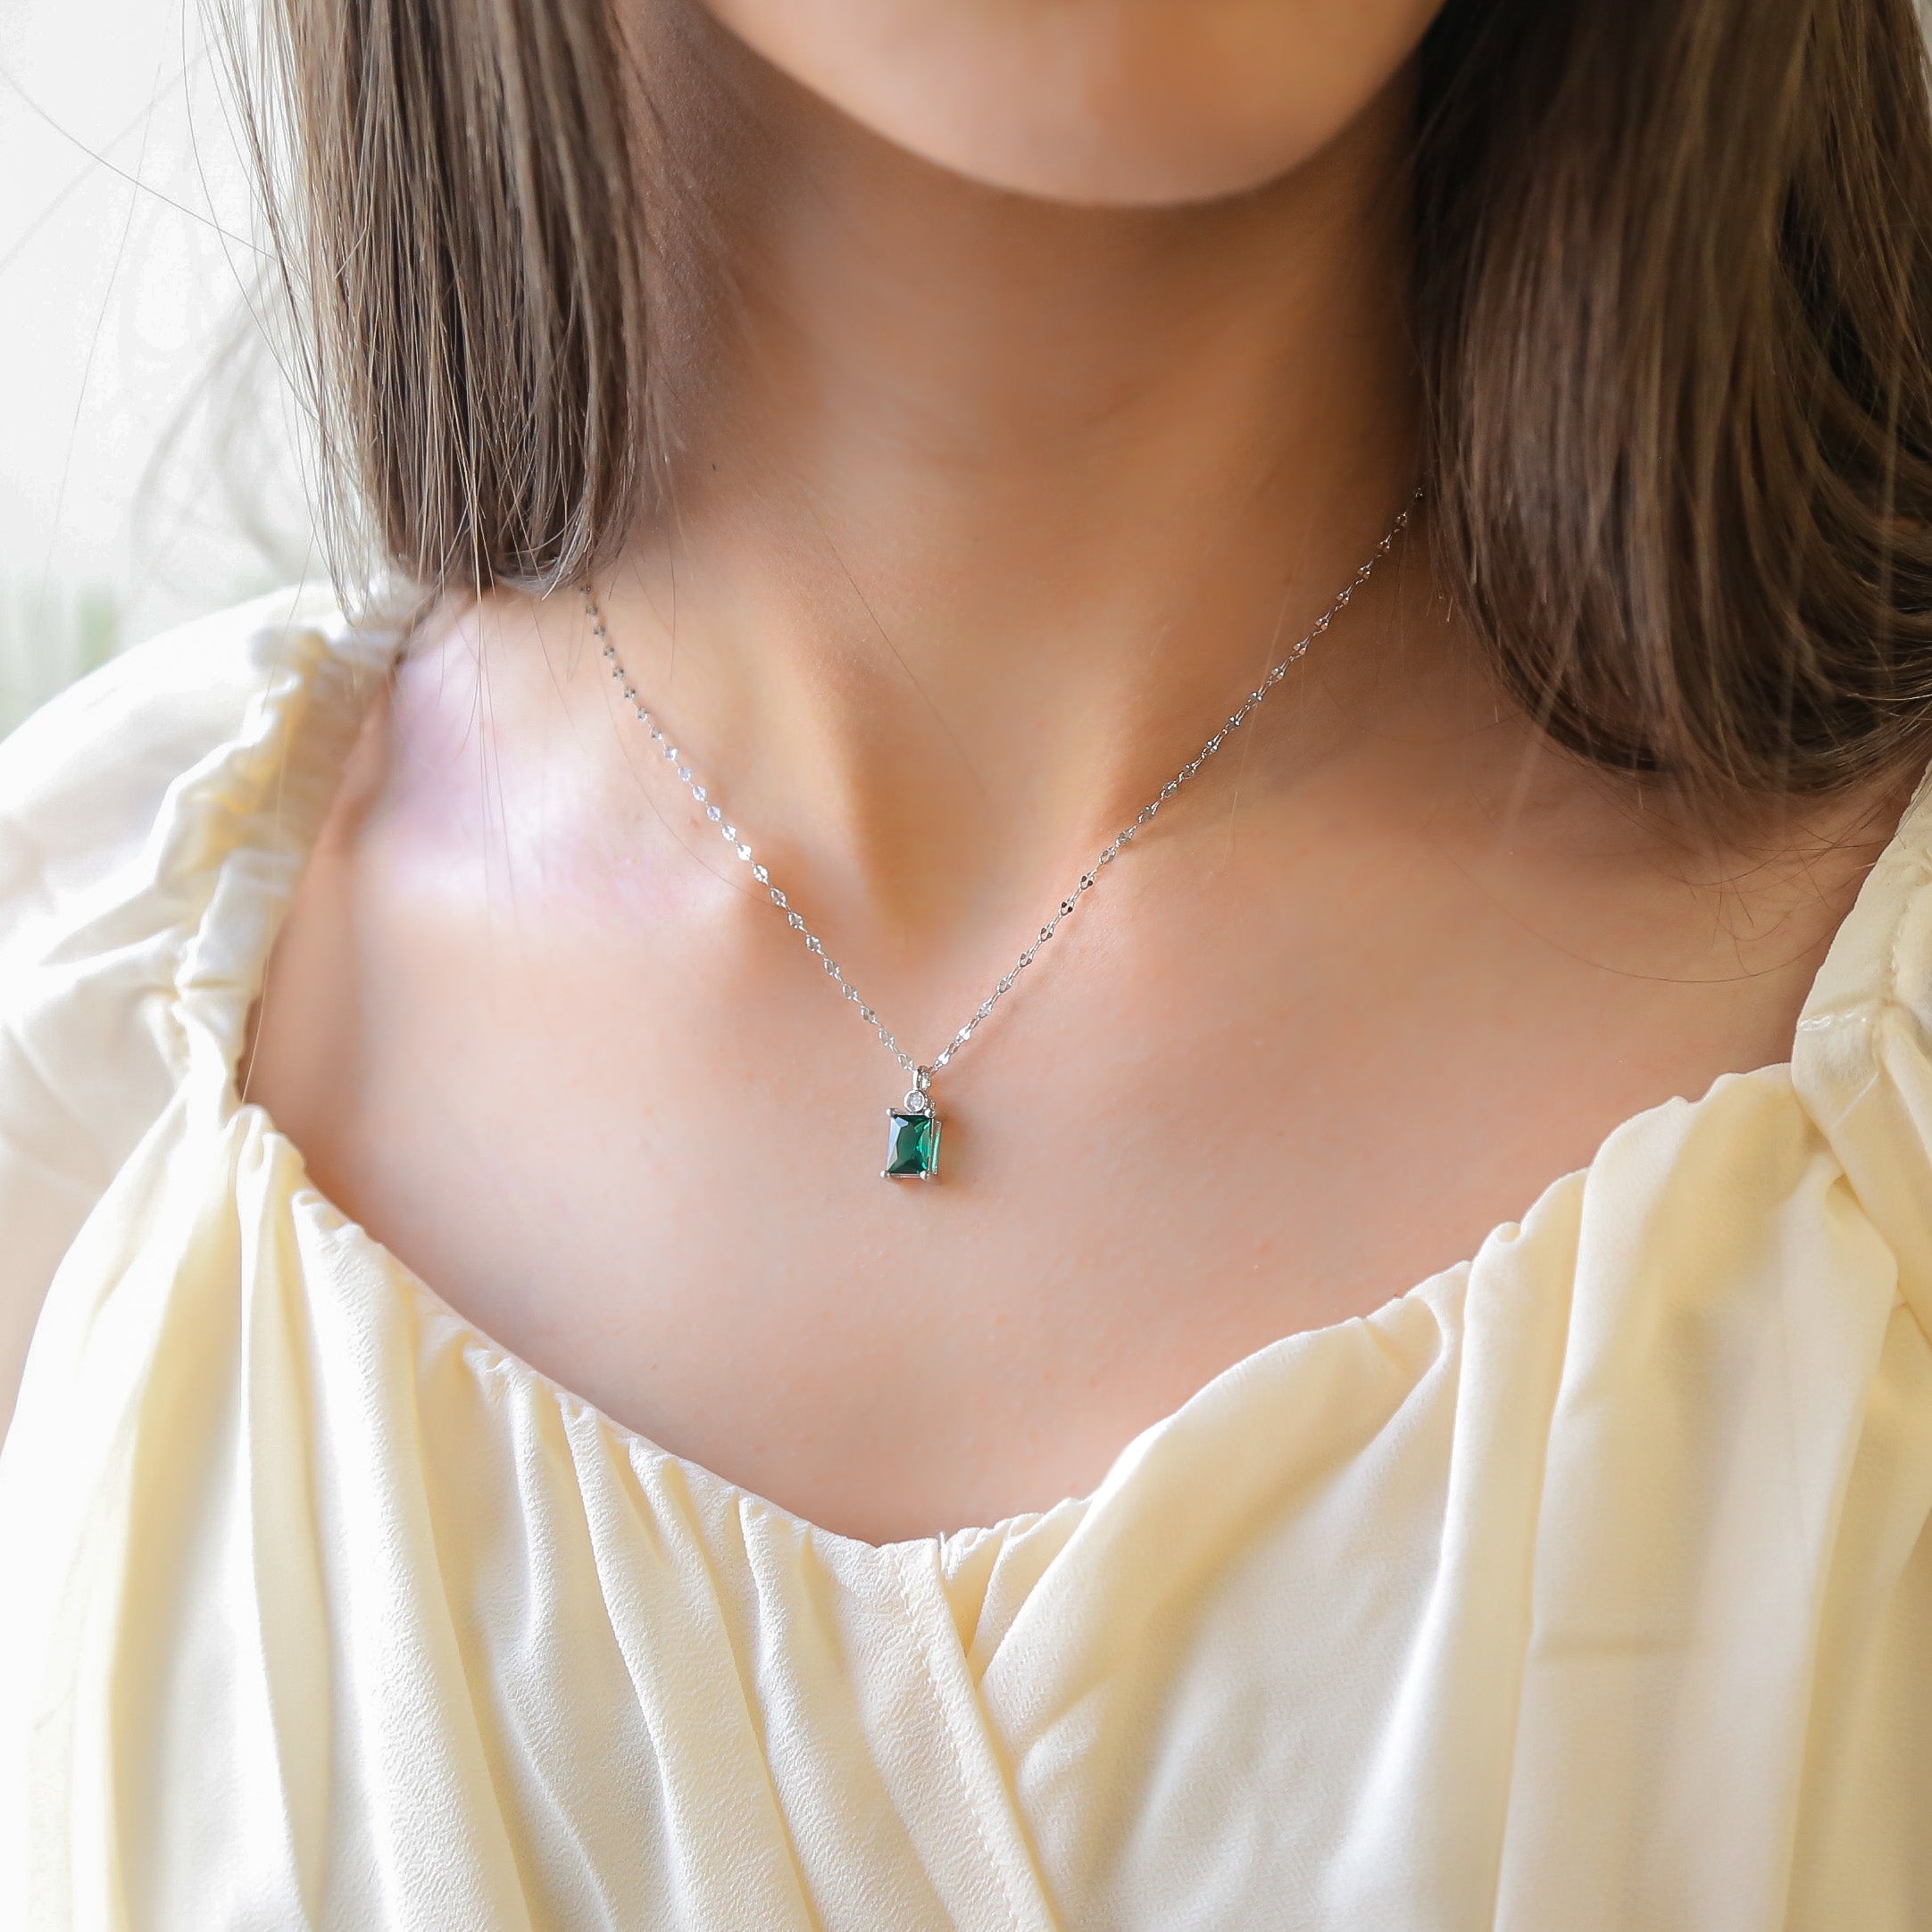 EMERALD SKY - Emerald CZ Necklace in Sterling Silver or 18K Gold